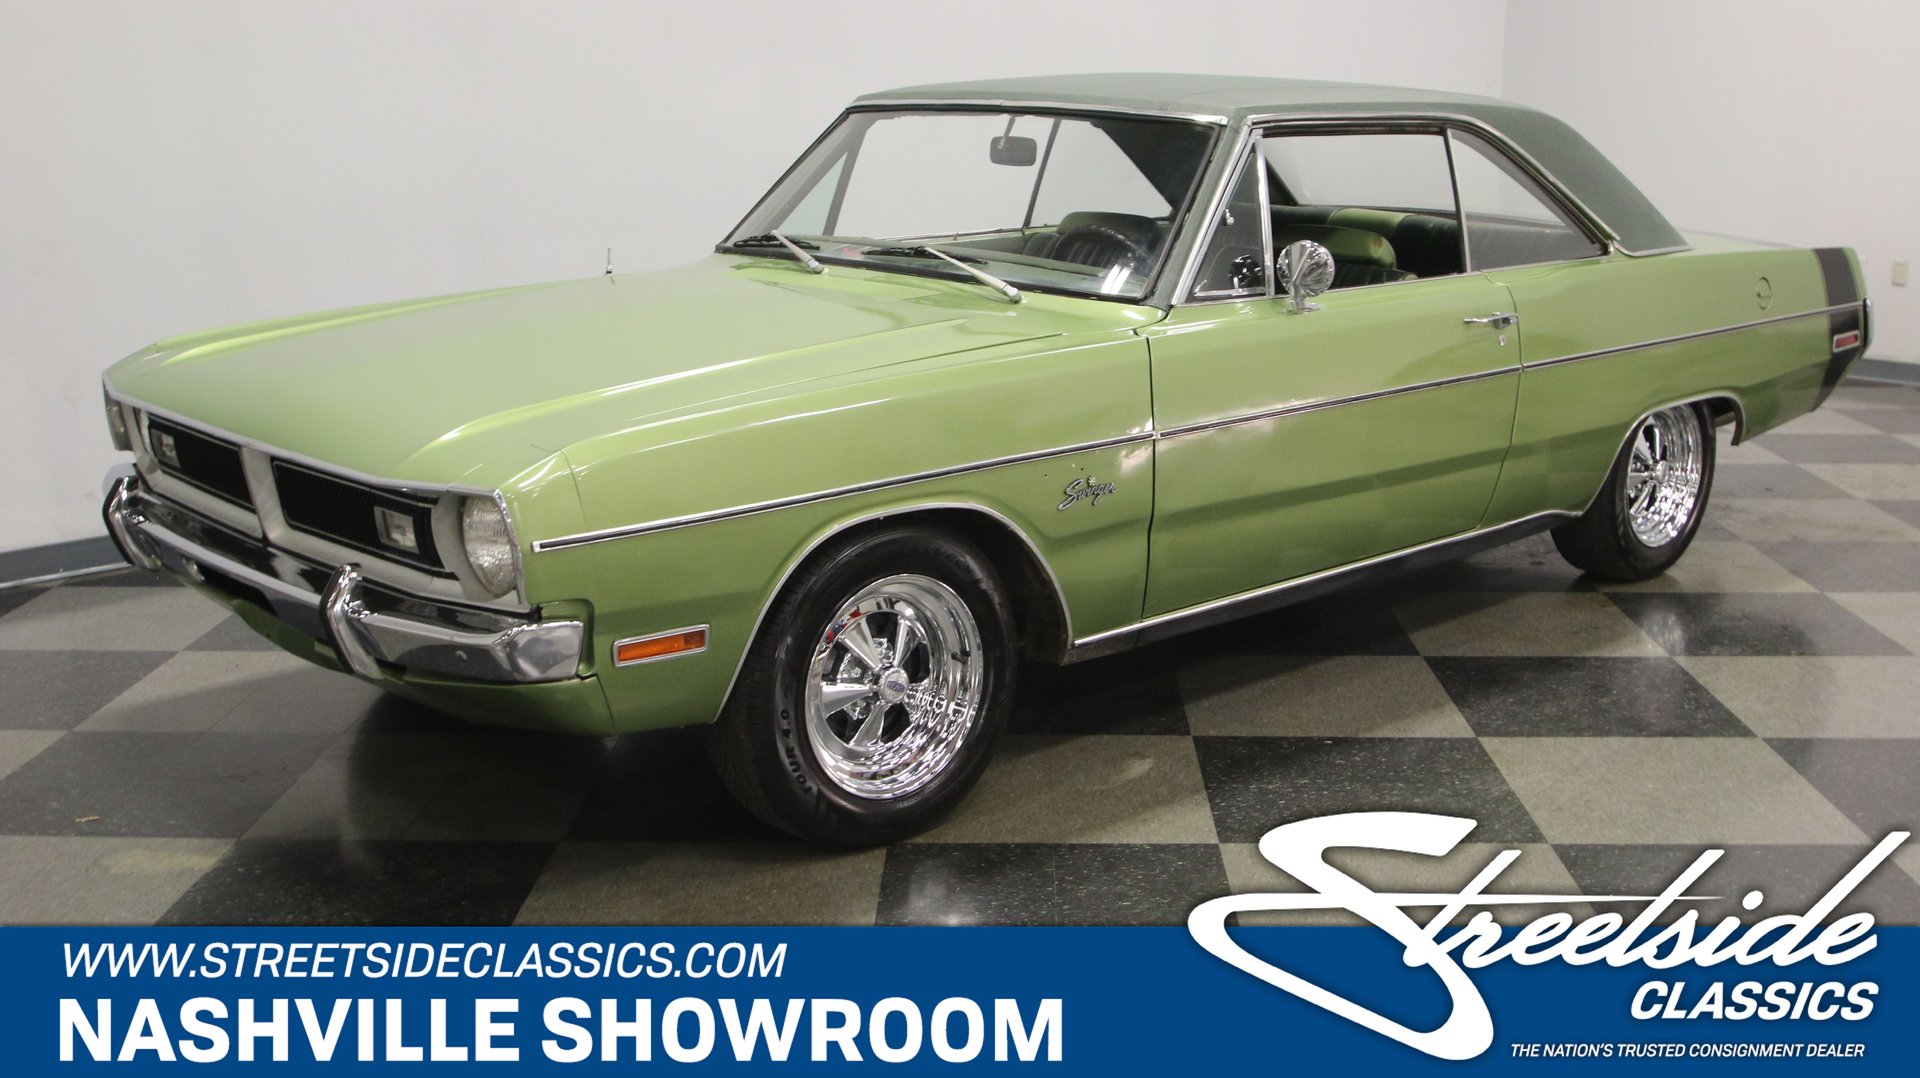 1971 Dodge Dart Classic Cars for Sale picture